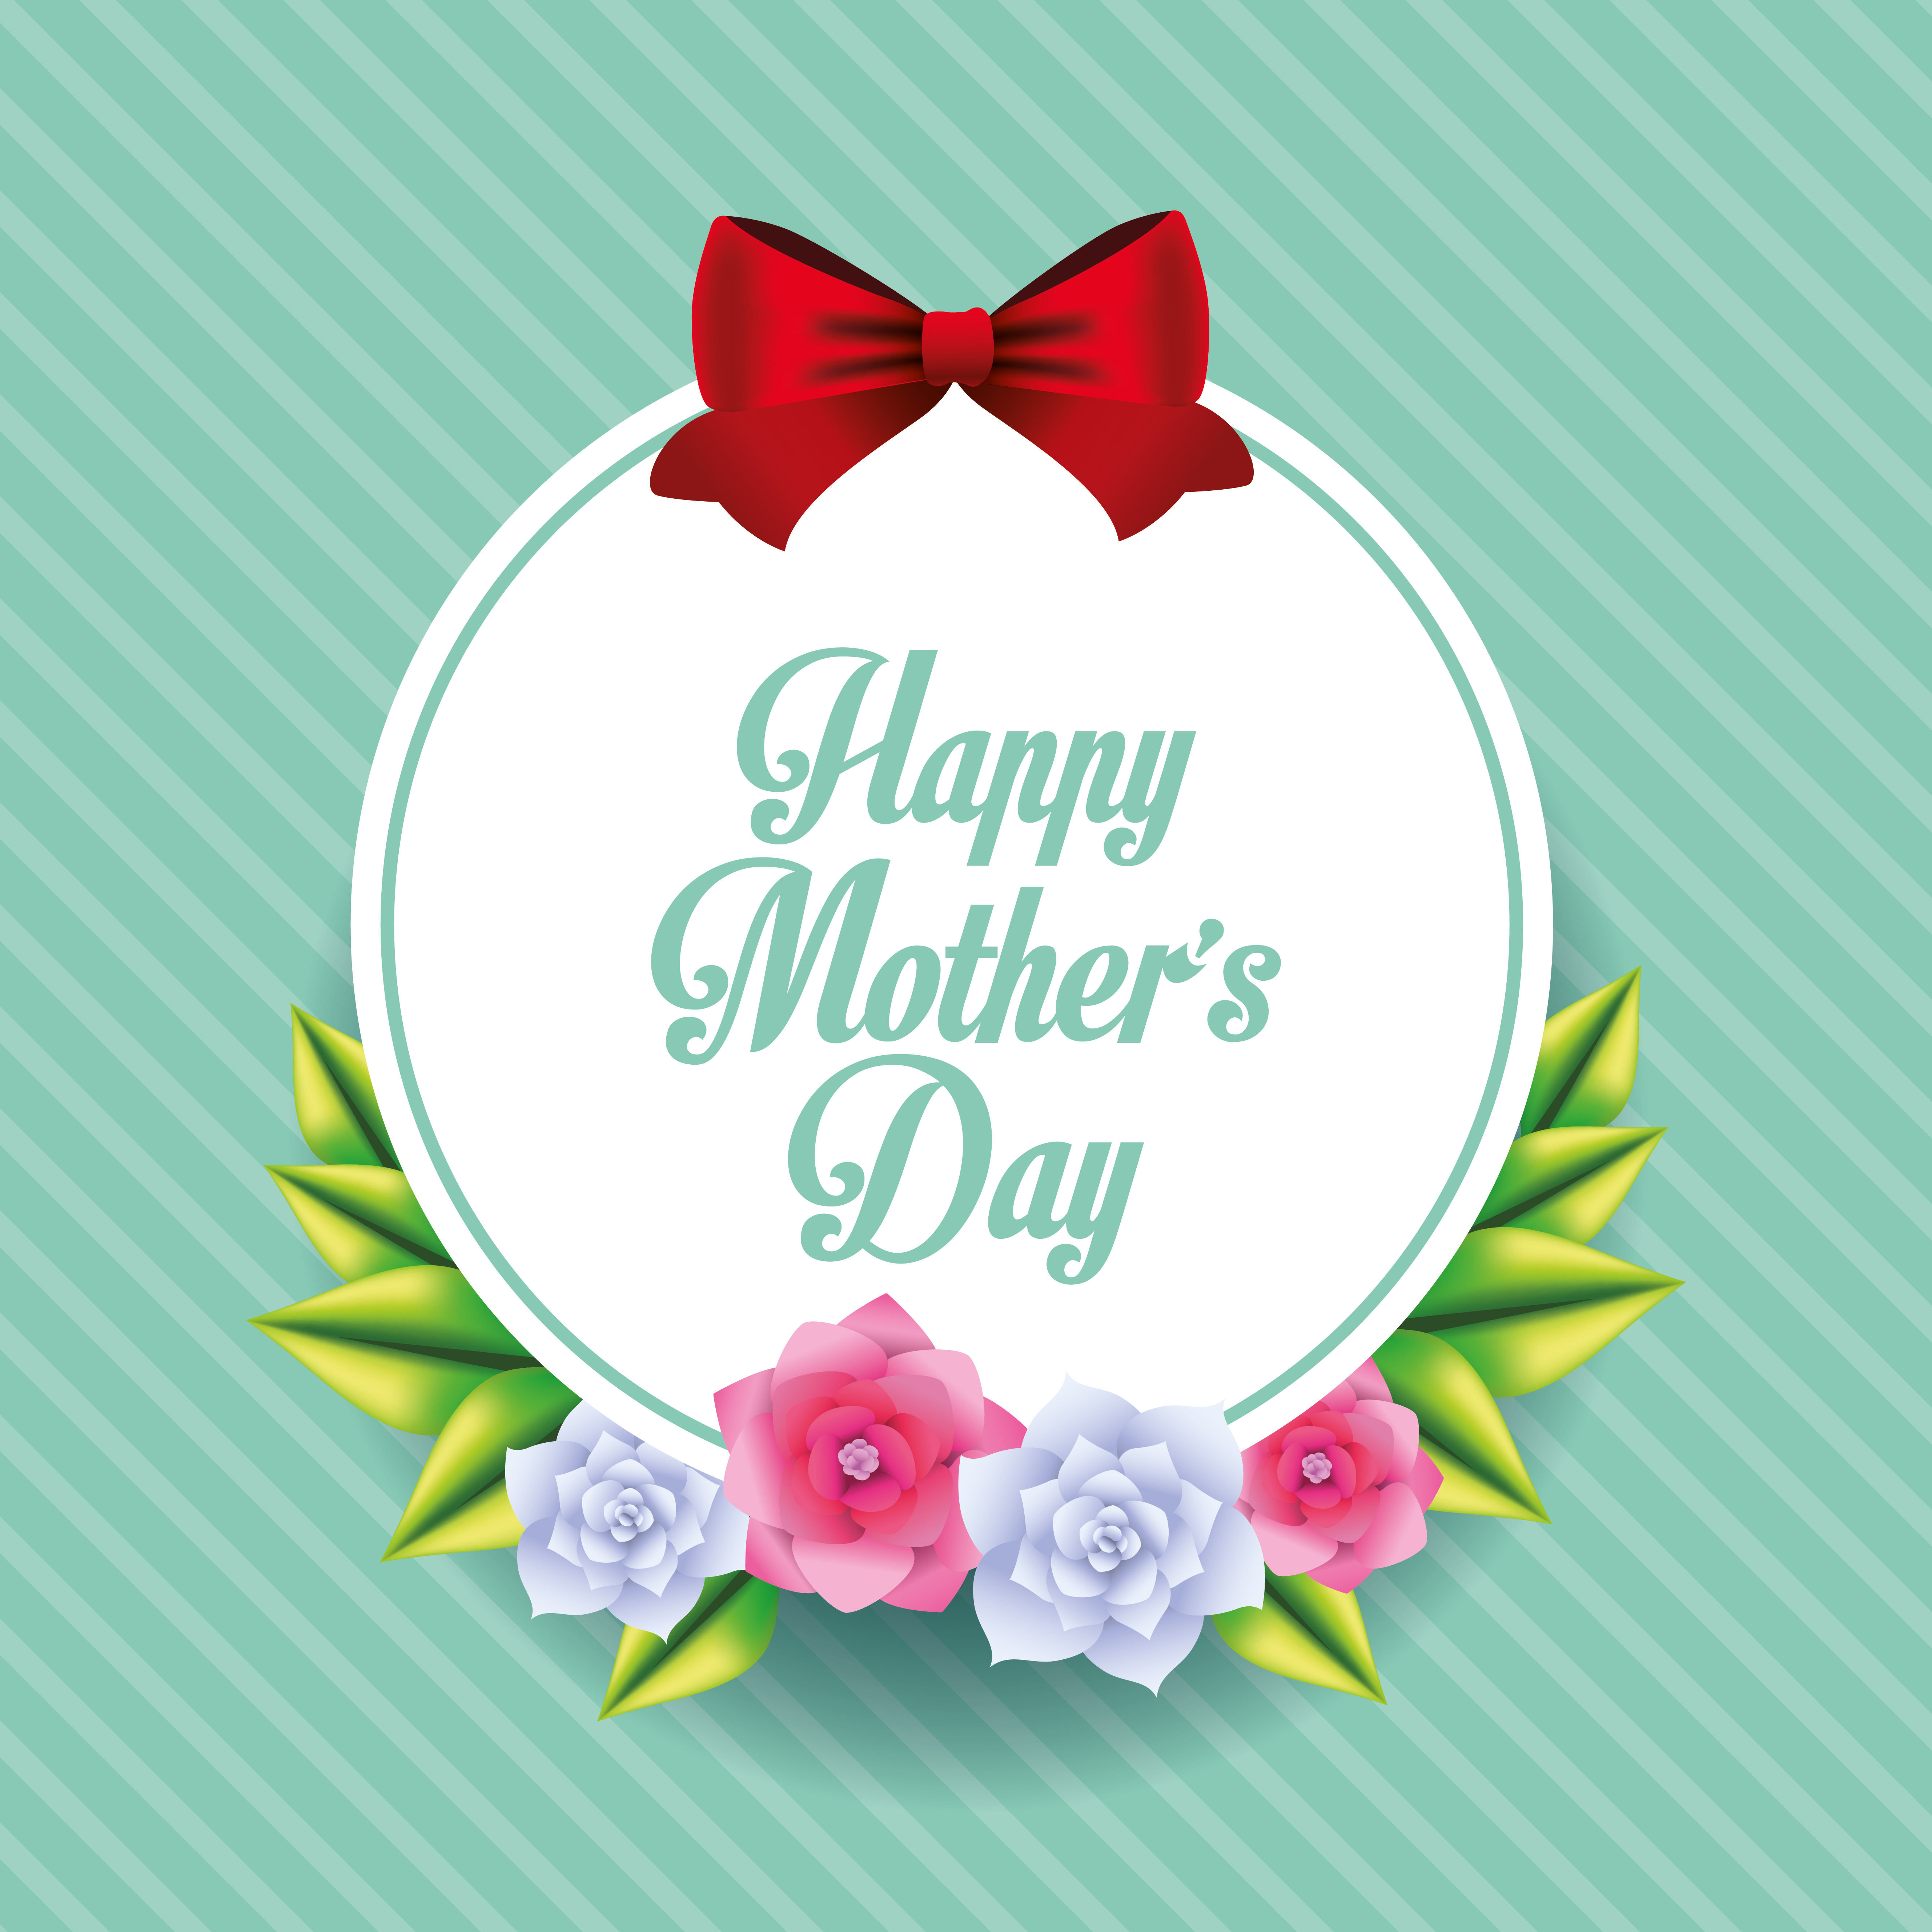 Download Happy mothers day card - Download Free Vectors, Clipart ...